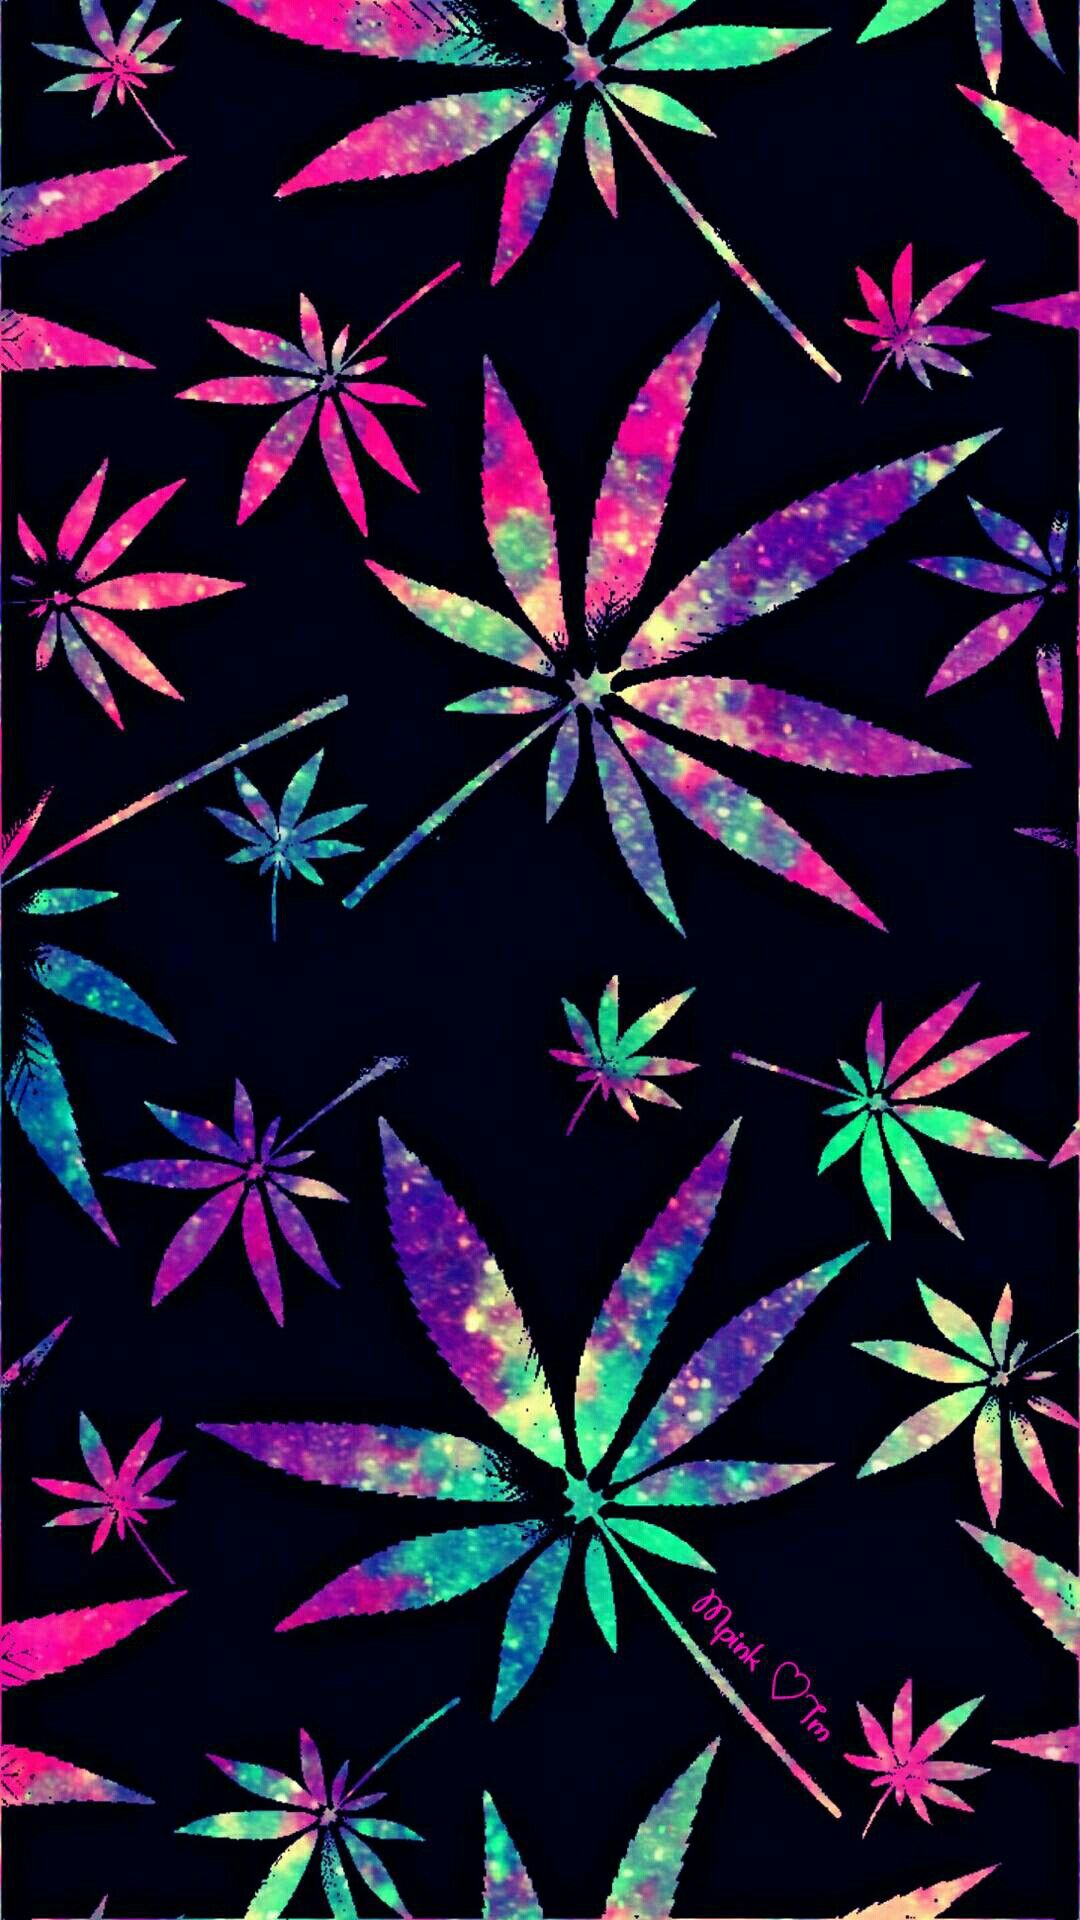 Weed Phone Wallpaper, Best Phone Wallpaper, Images - Shiny Galaxy Weed , HD Wallpaper & Backgrounds